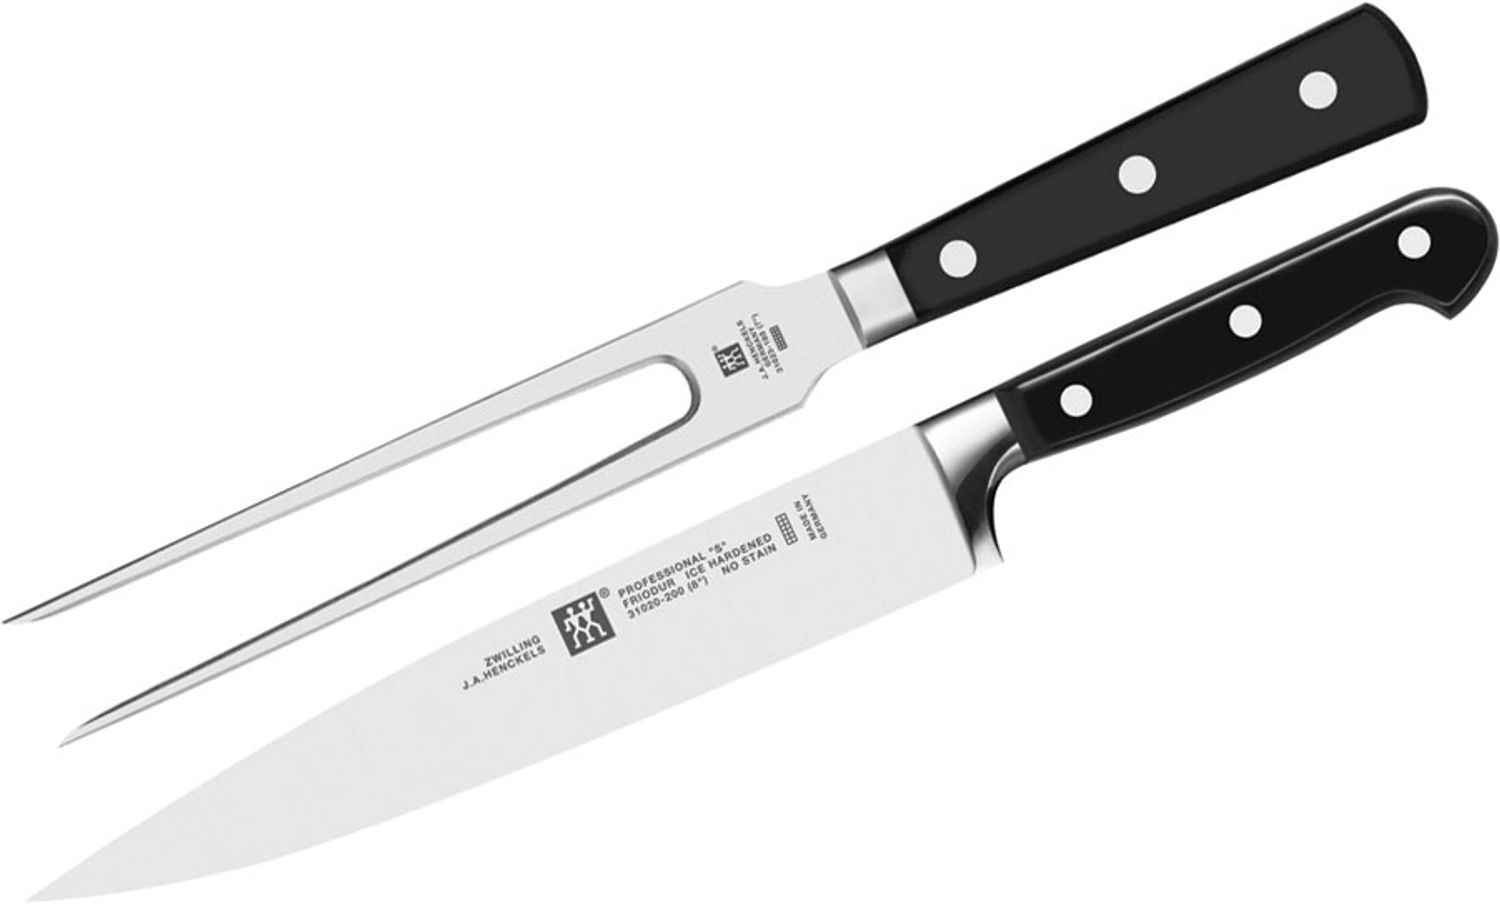 Carving knife PROFESSIONAL S 16 cm, Zwilling 